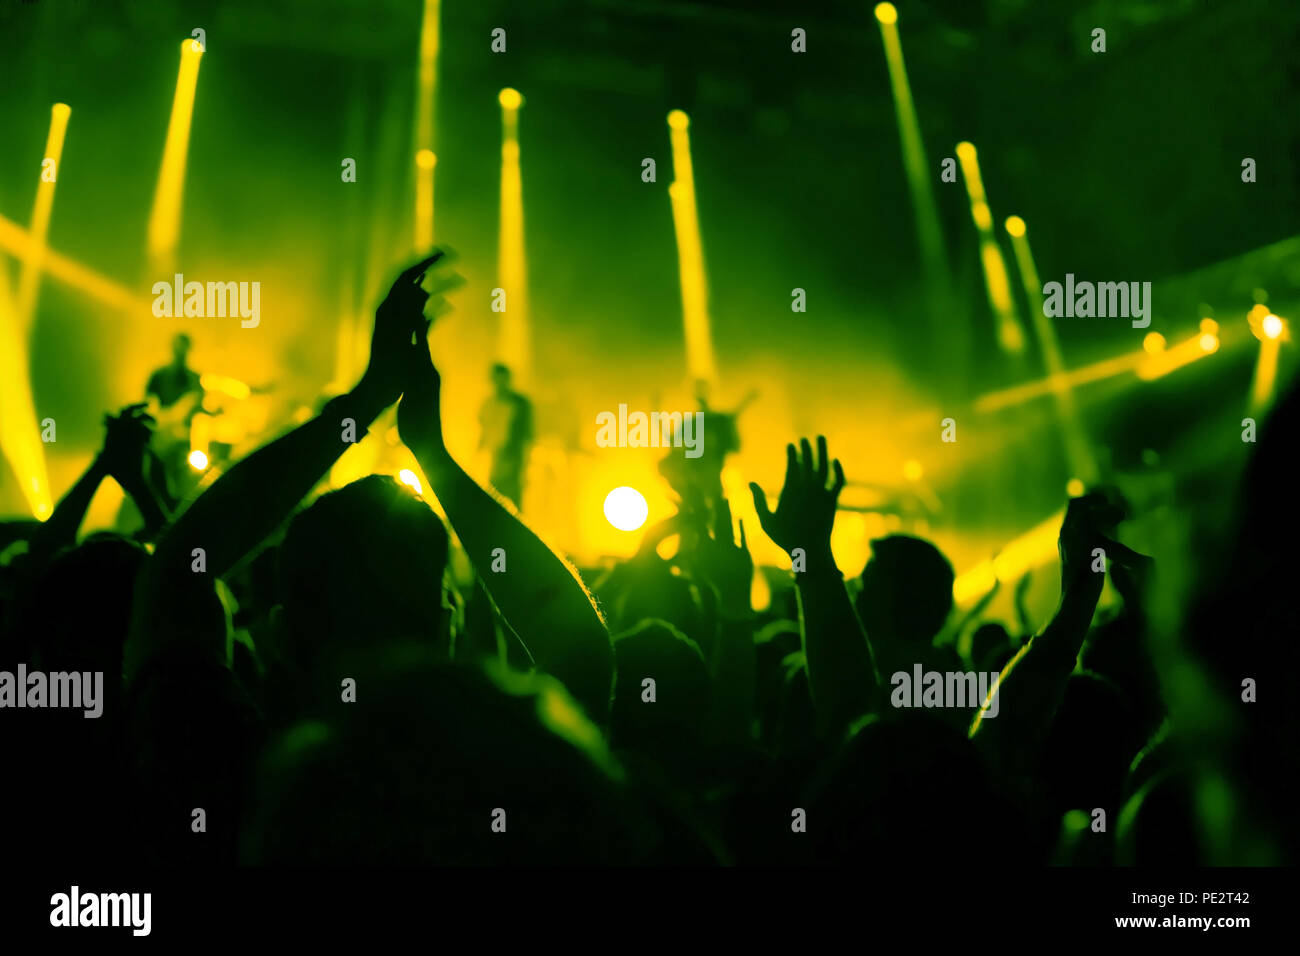 applause, crowd of people applauding to musicians at music festival, silhouettes of clapping hands at concert show Stock Photo